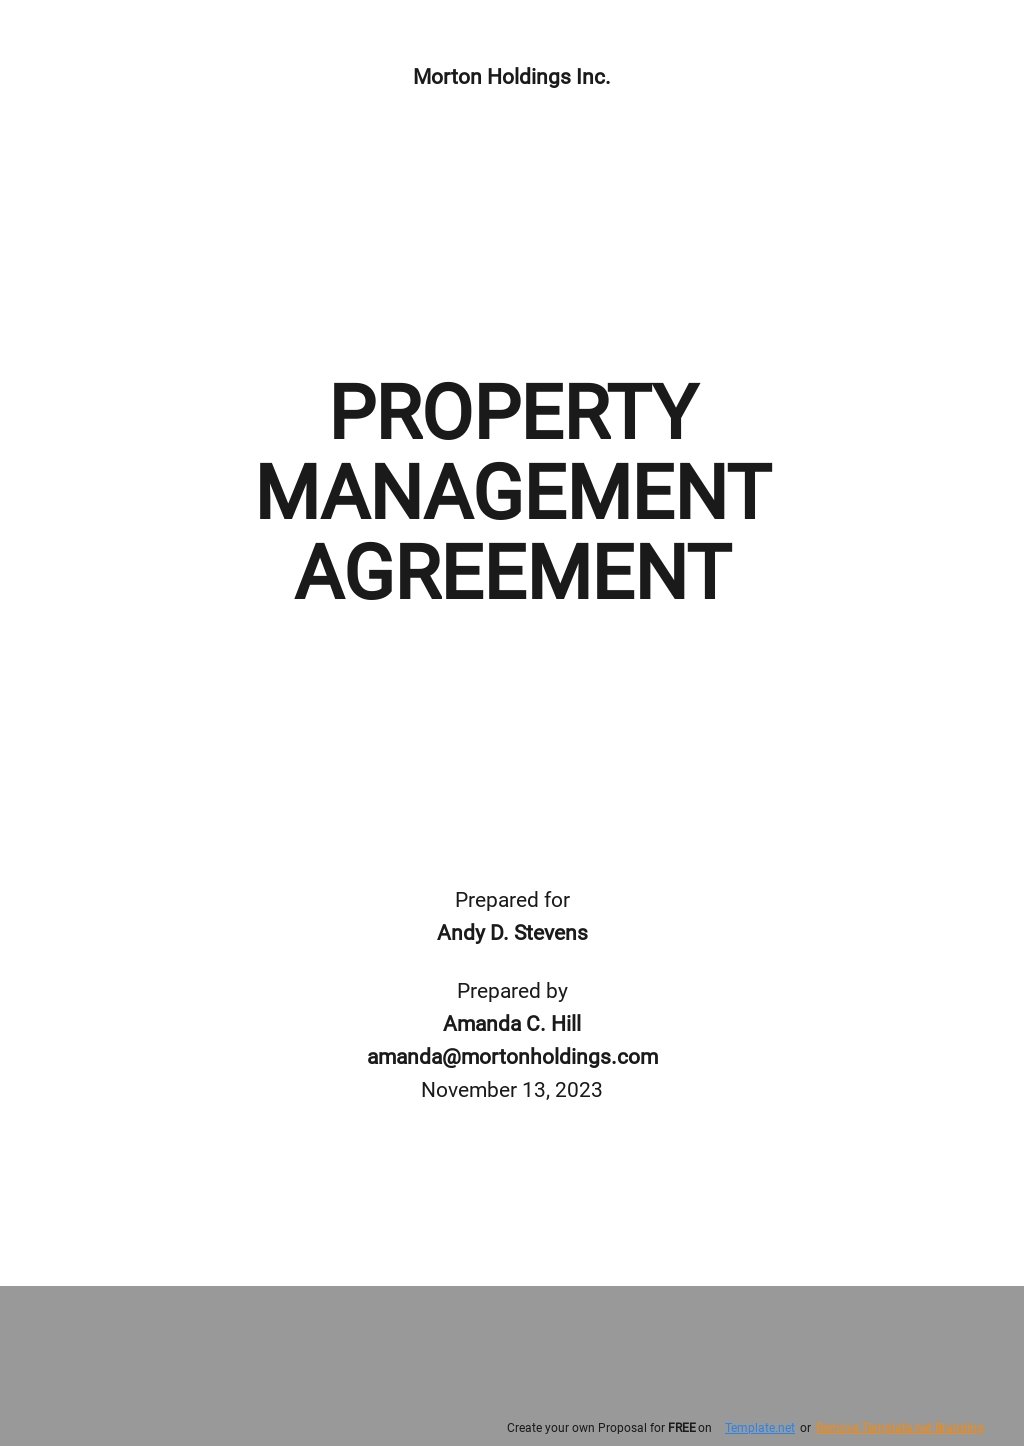 Commercial Property Management Agreement Template - Google Docs, Word